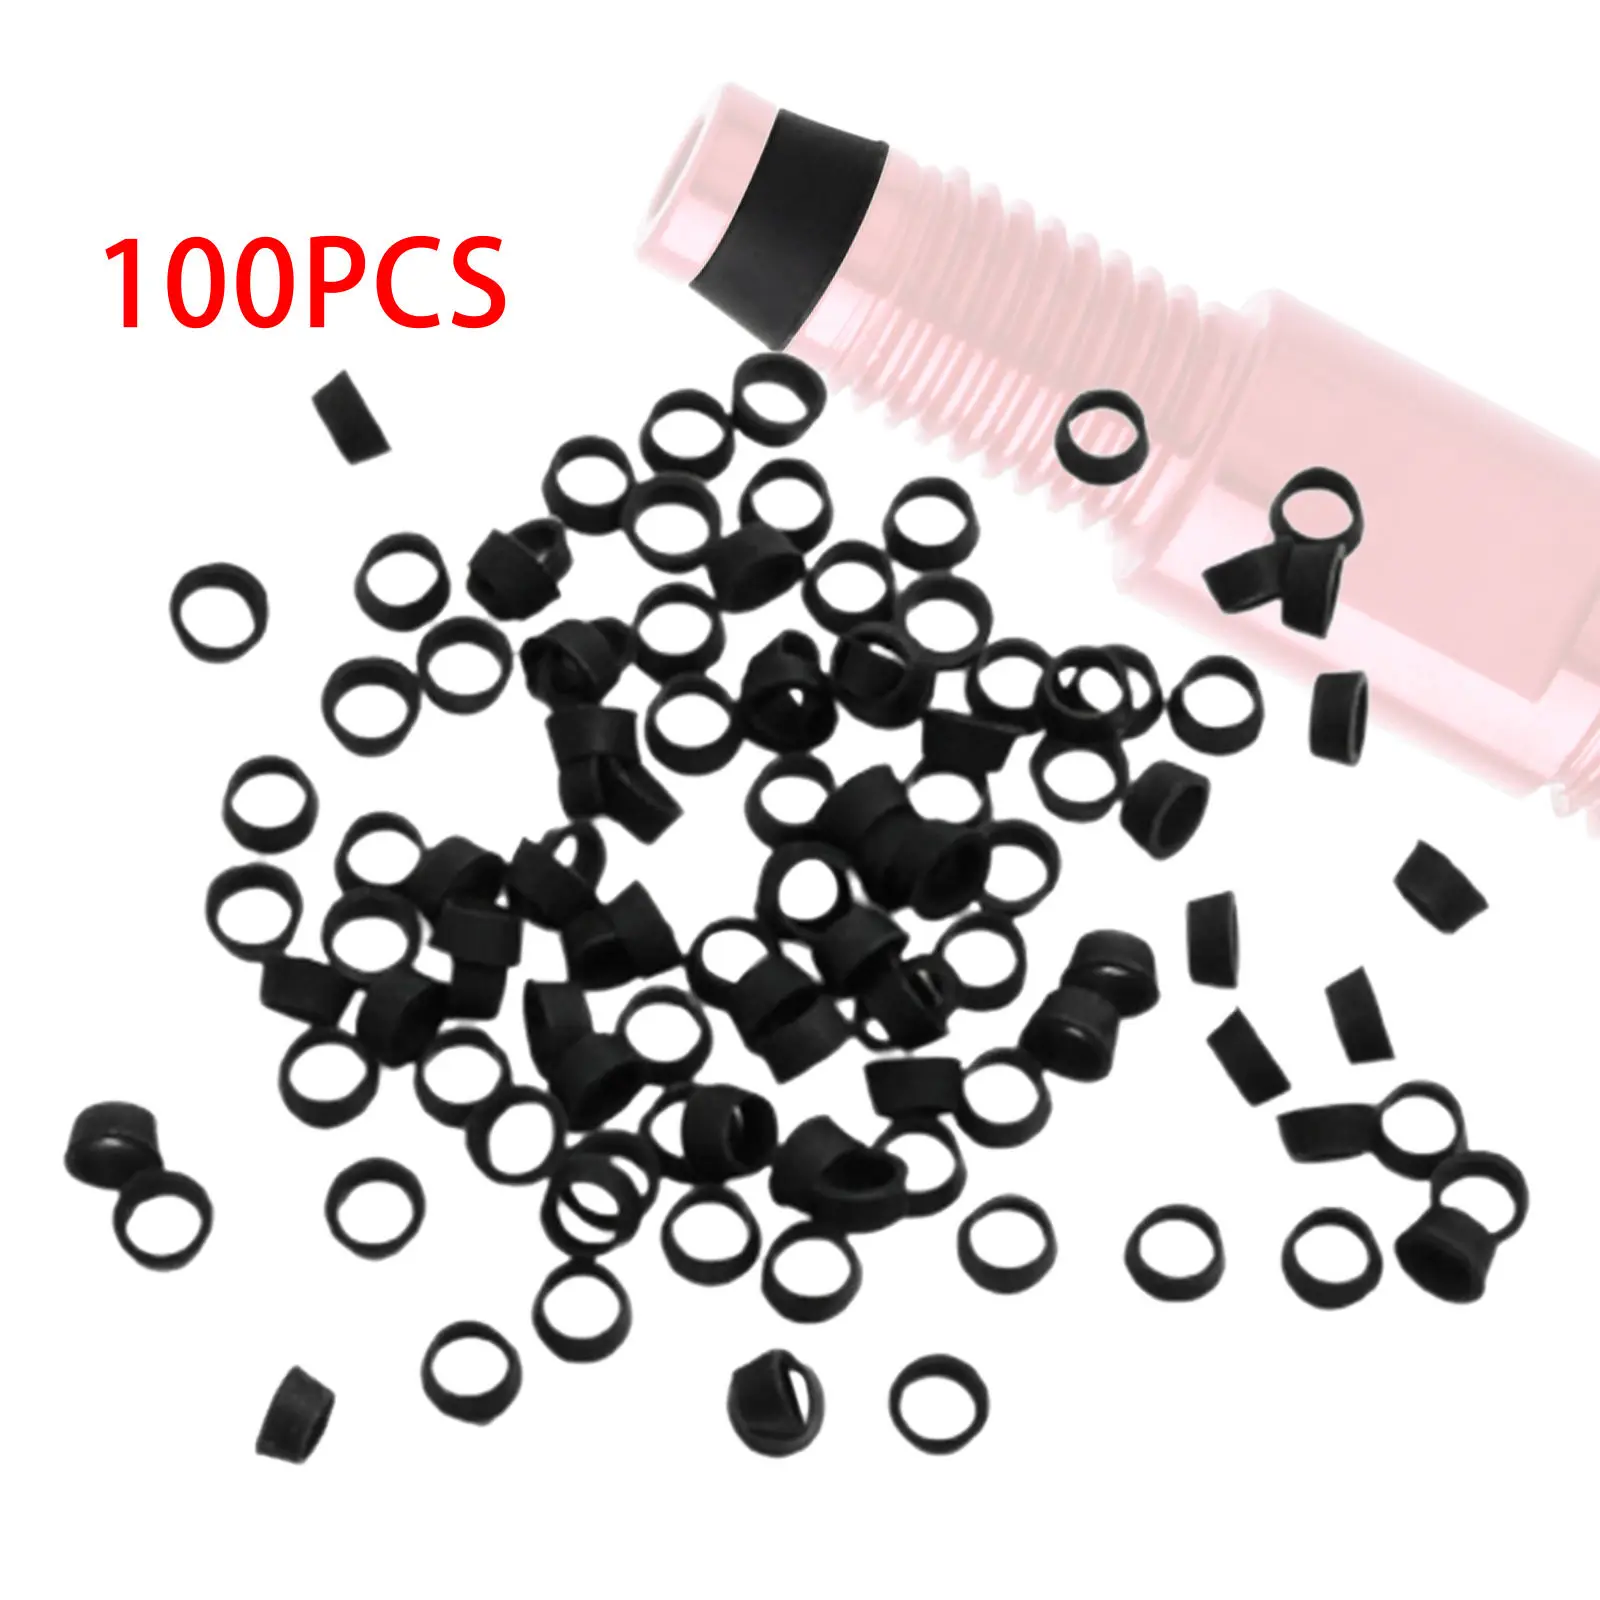 100Pcs Valve Extender Sealing Ring Removable Inner Tube Accessories